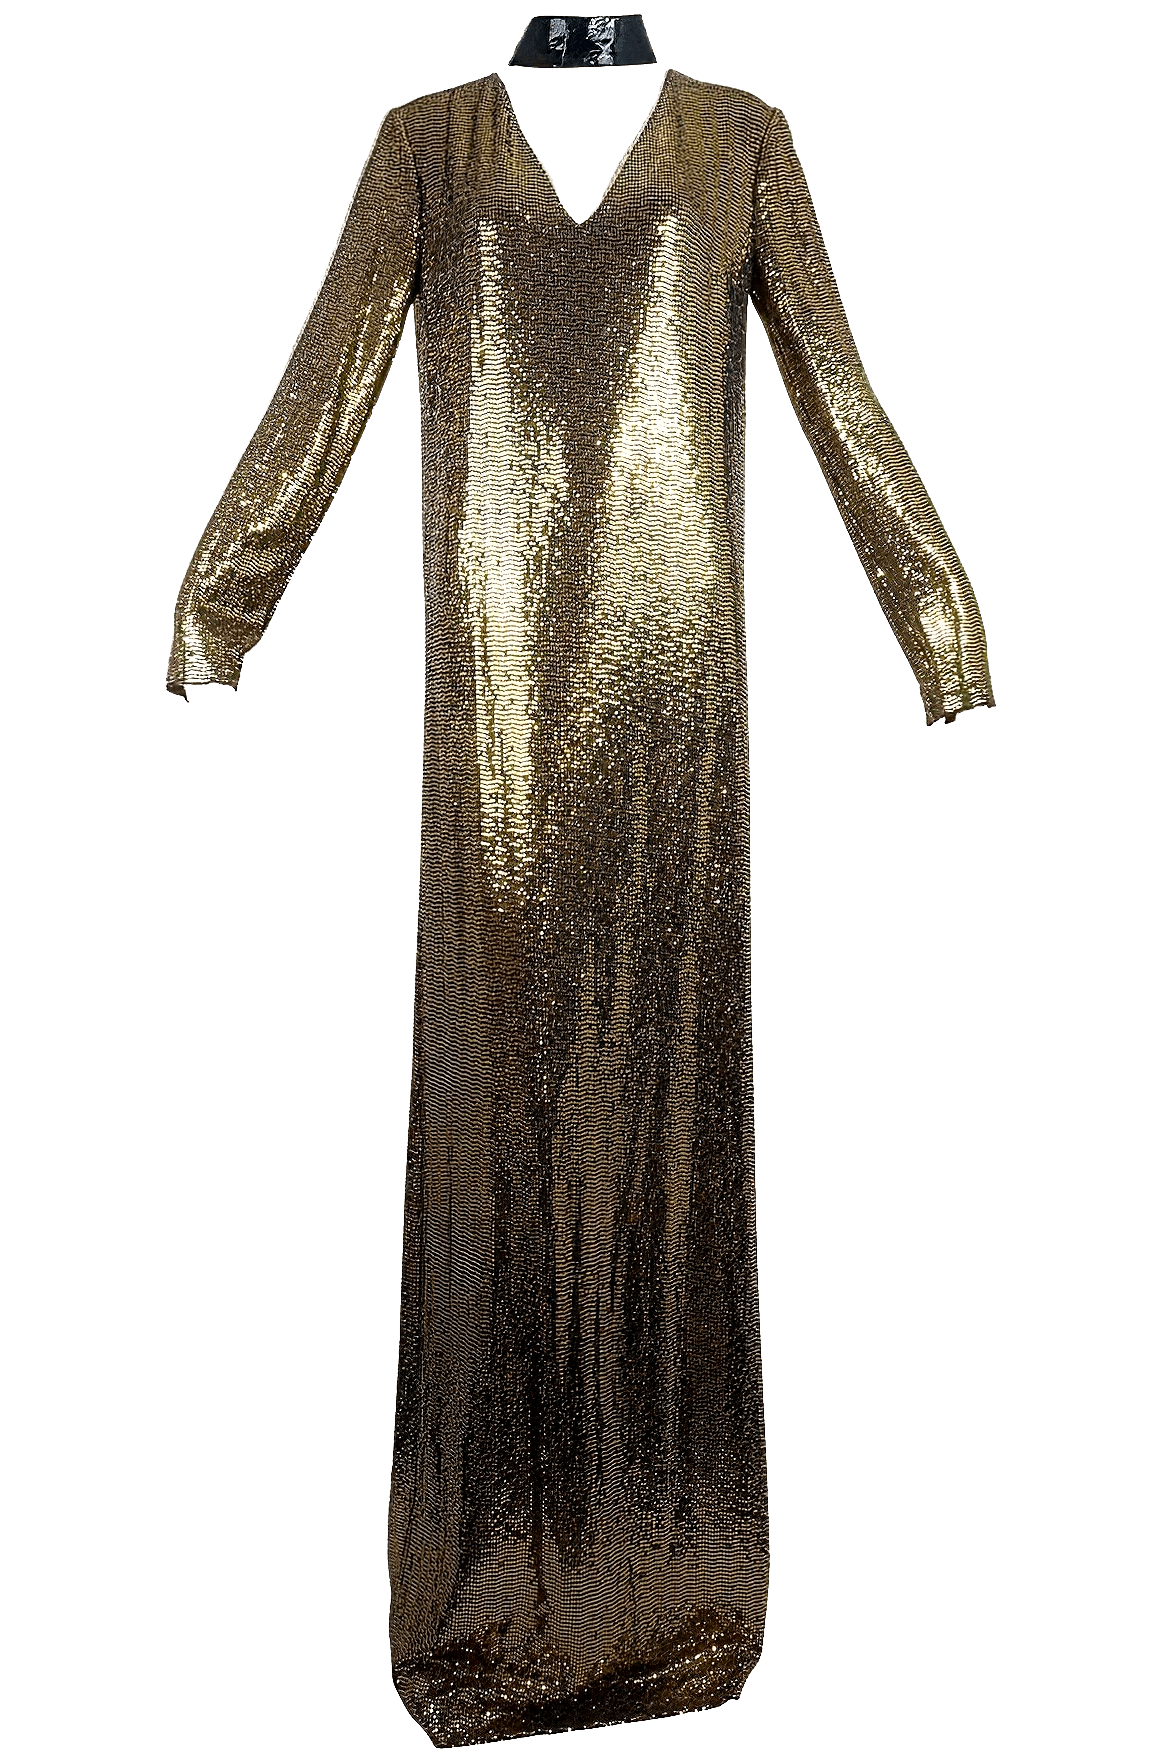 Gucci Snakeskin Pattern Laminated Gold Gown w/Patent Leather Choker - Foxy Couture Carmel